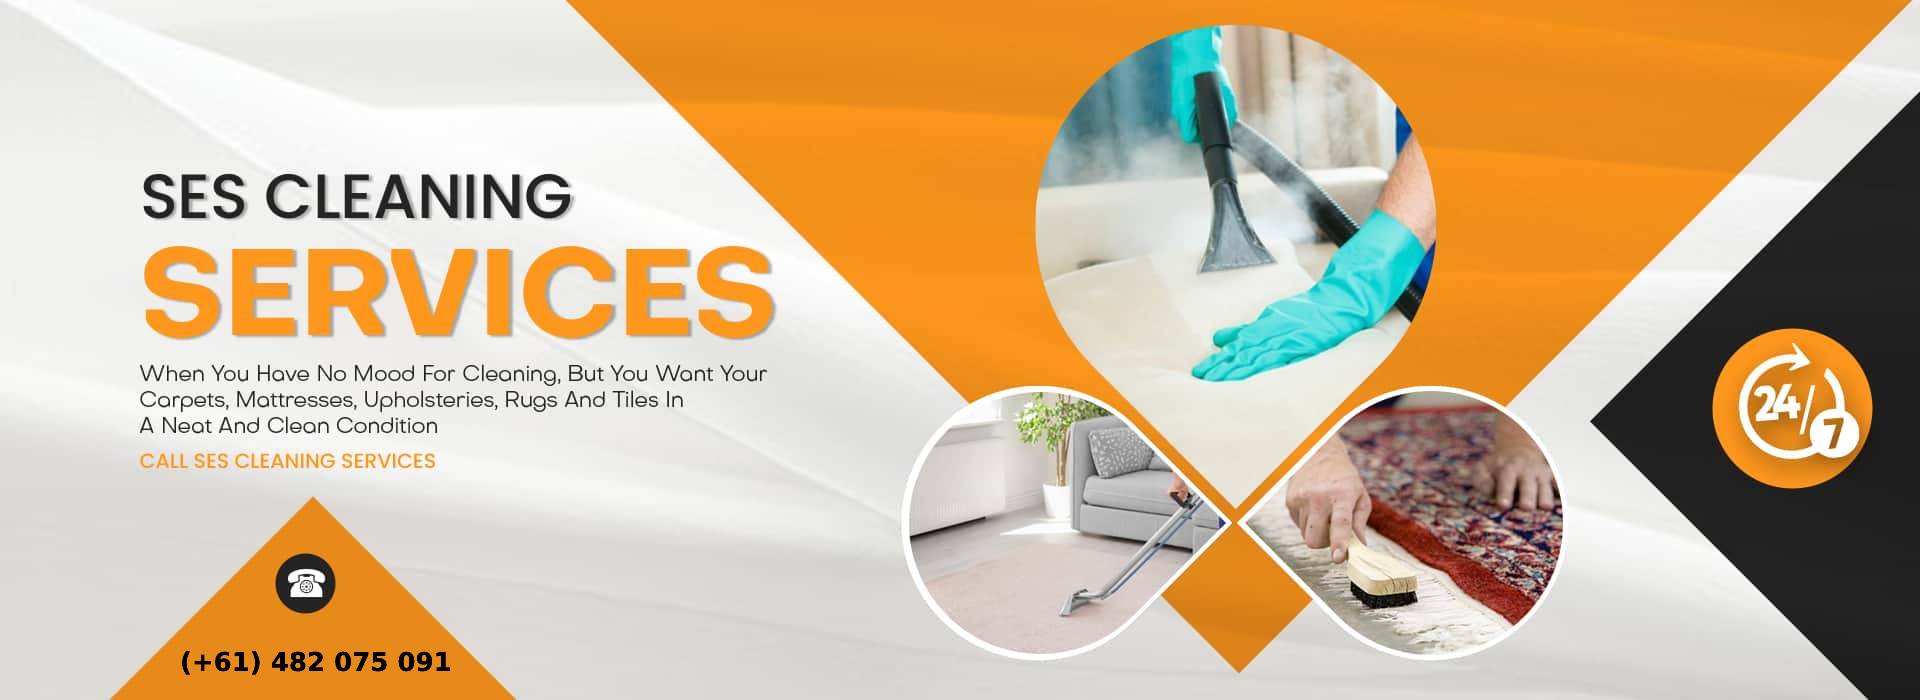 ses cleaning services